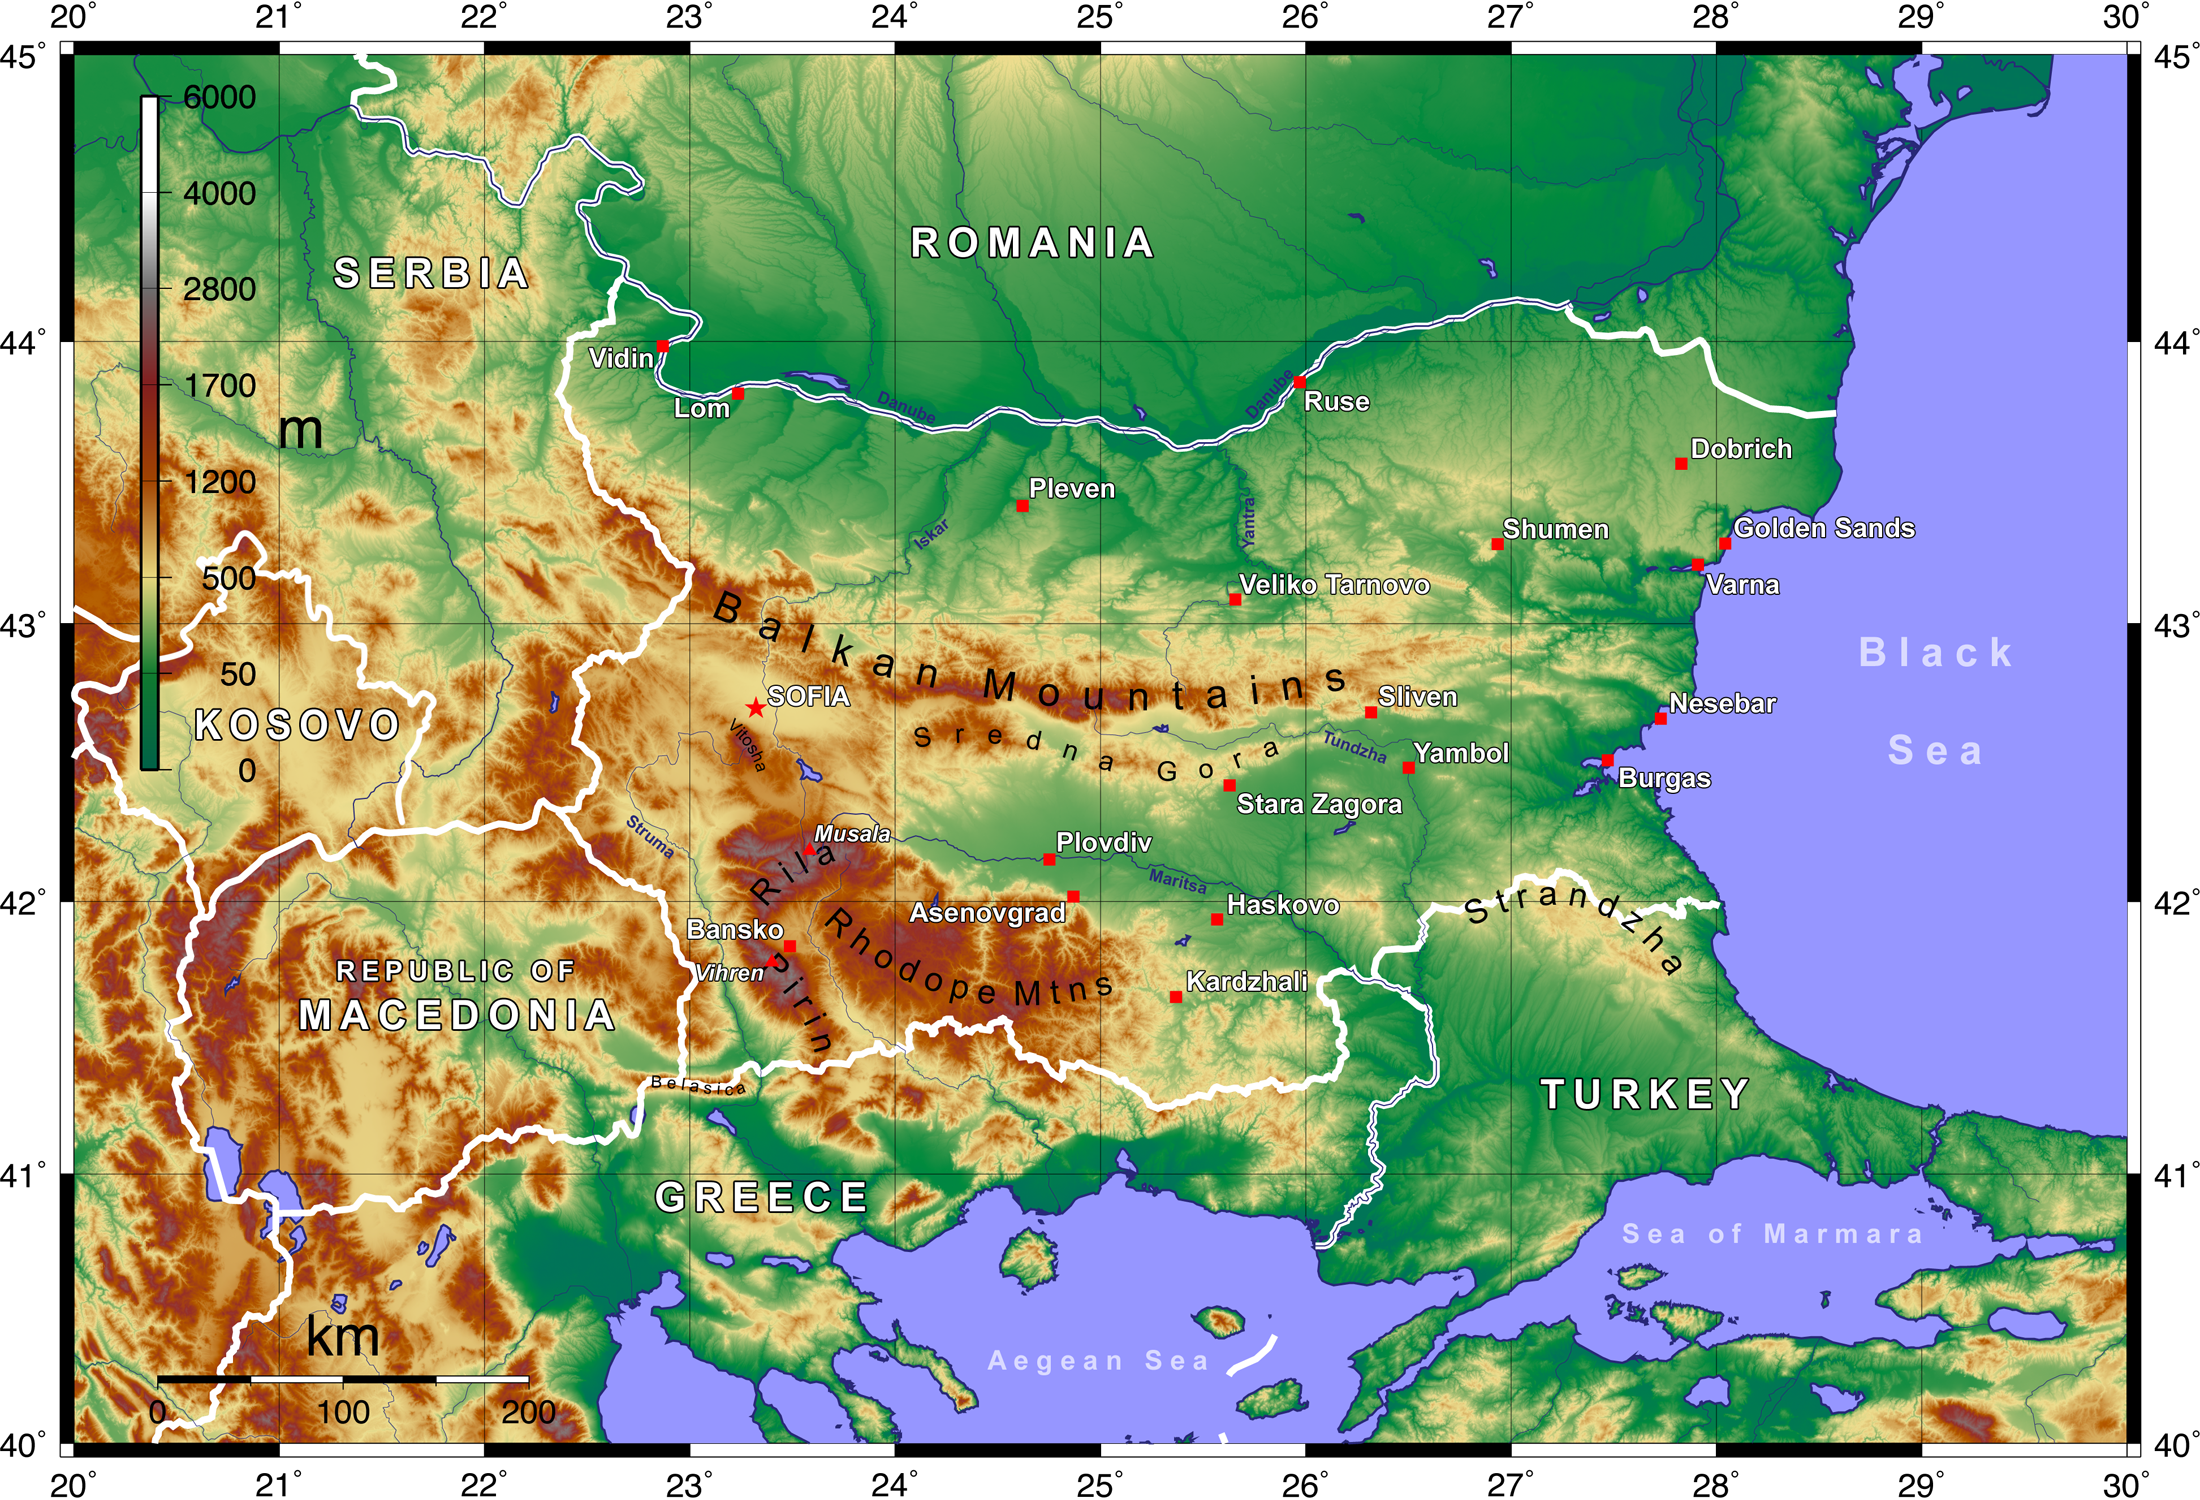 http://upload.wikimedia.org/wikipedia/commons/f/fd/Topographic_Map_of_Bulgaria_English.png